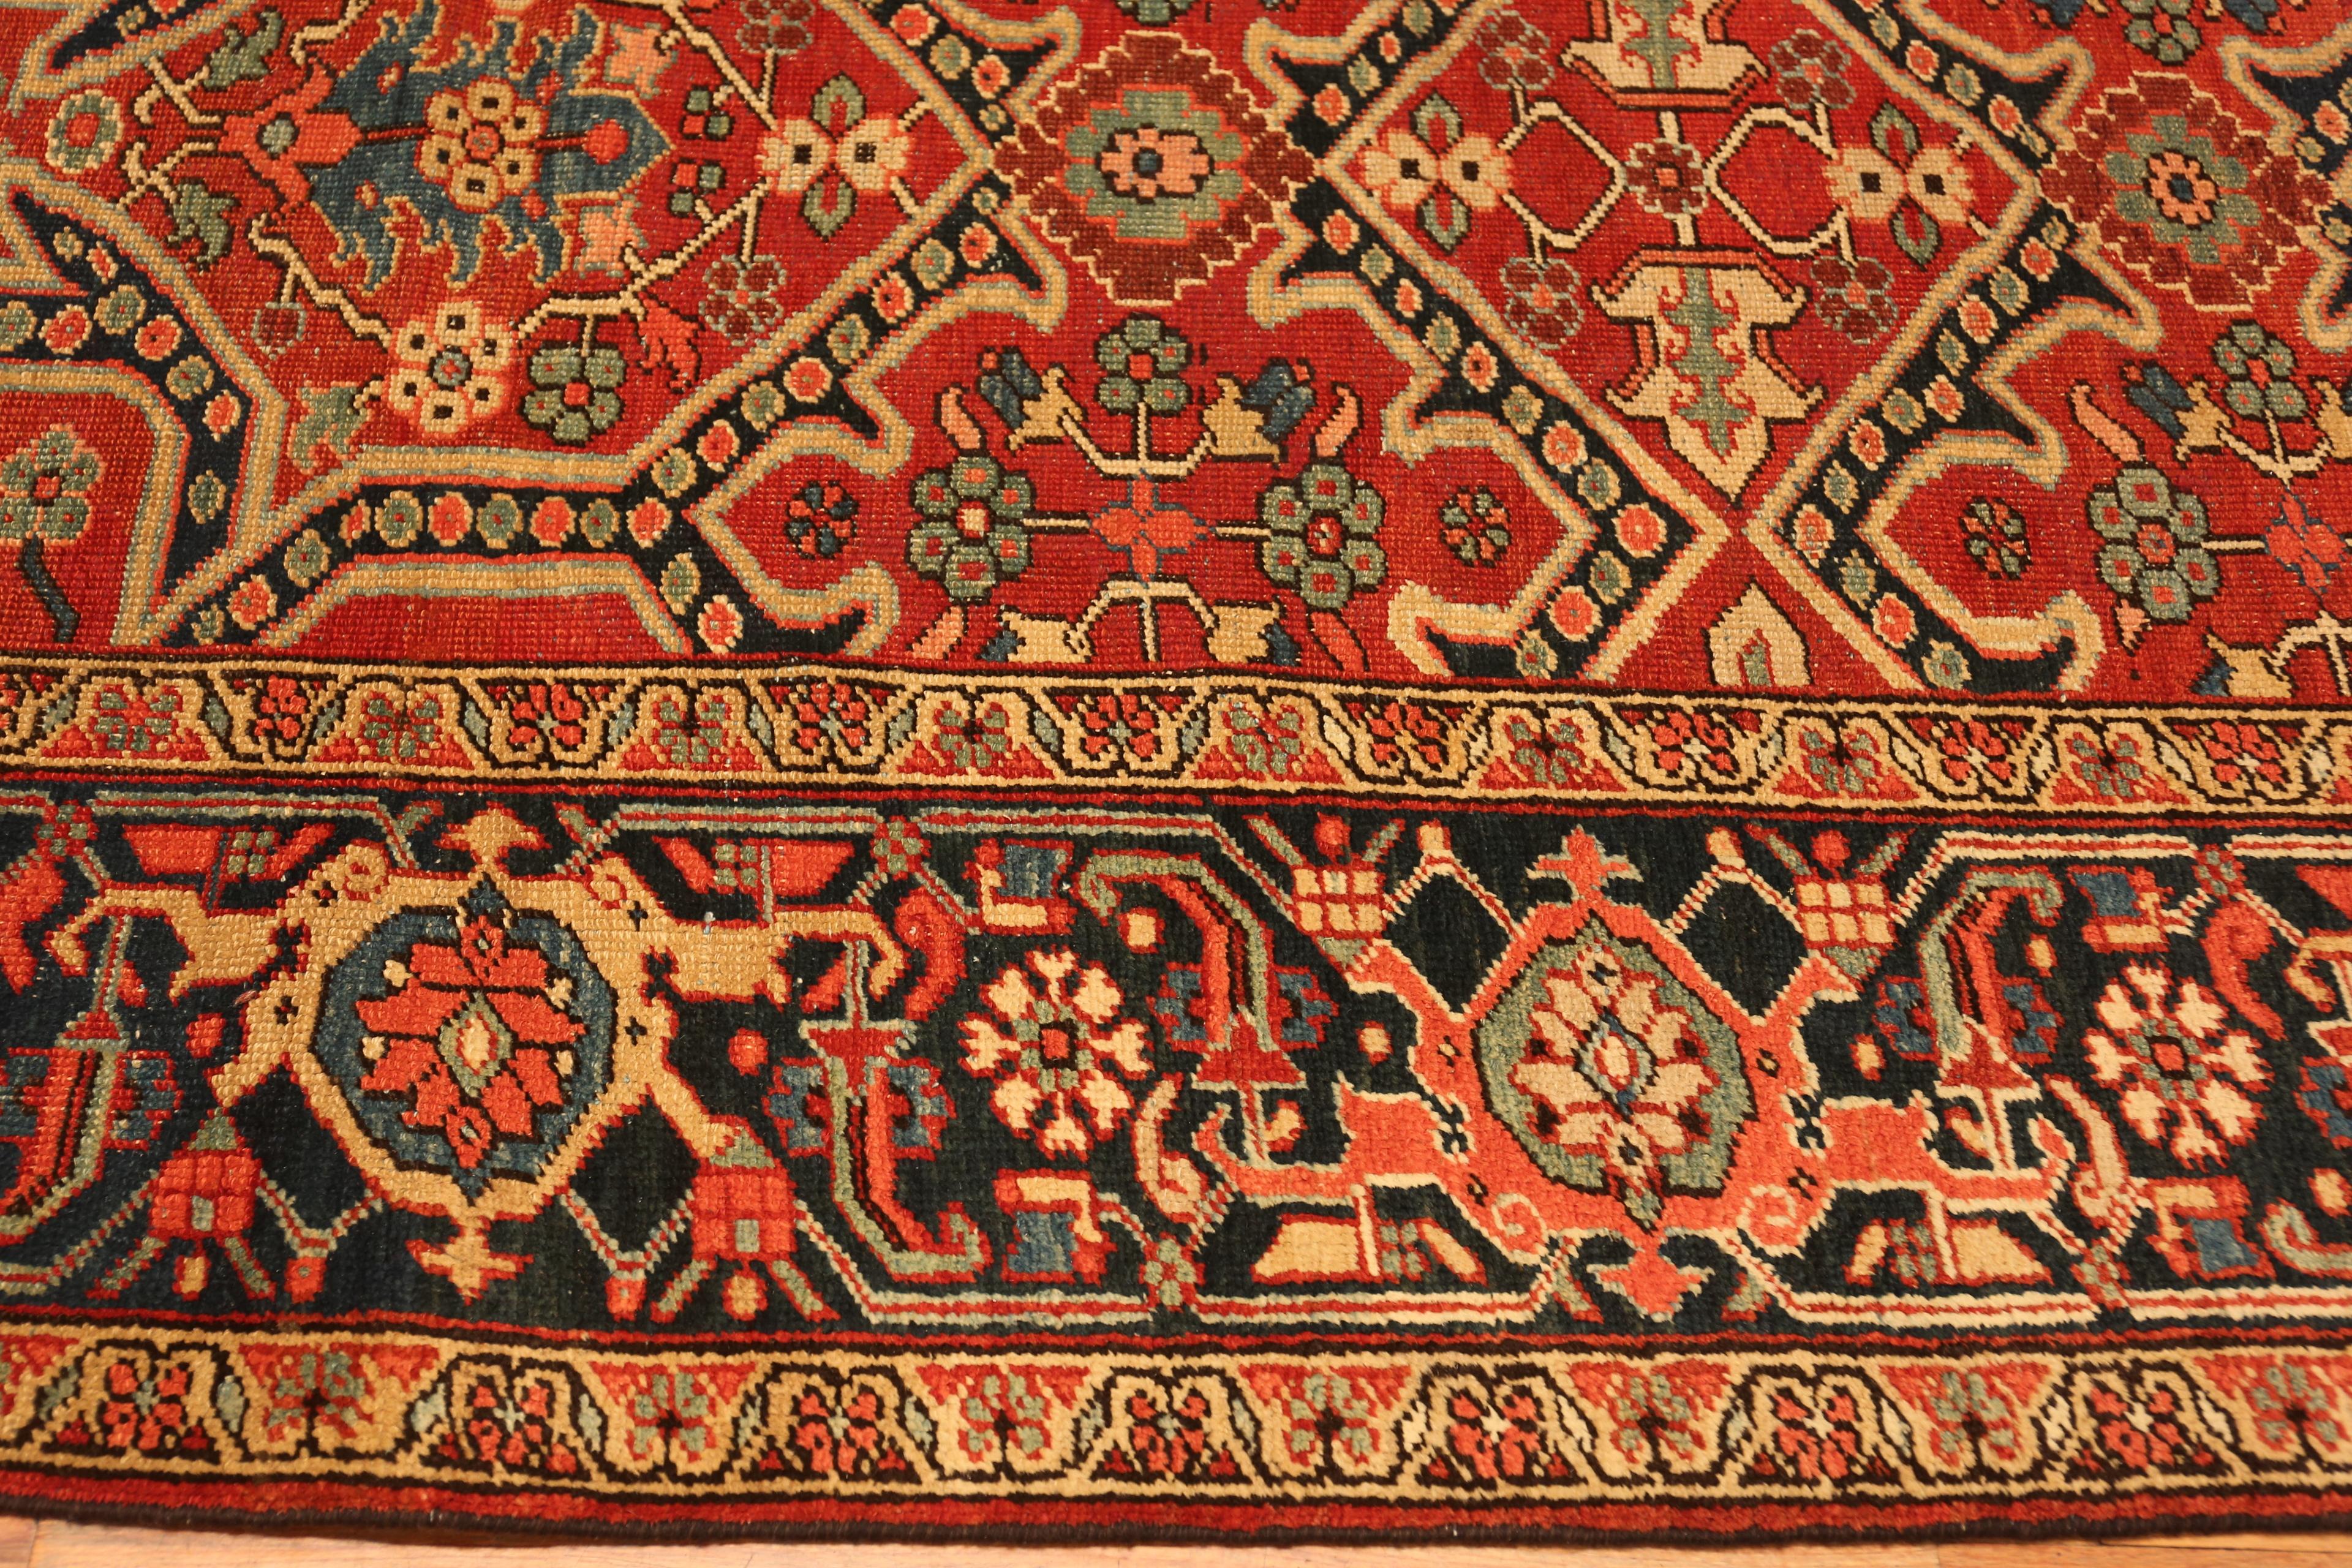 Geometric Antique Persian Heriz Rug, Country of Origin / rug type: Persian Rugs, Circa date: 1920. Size: 9 ft 2 in x 11 ft 8 in (2.79 m x 3.56 m)
 